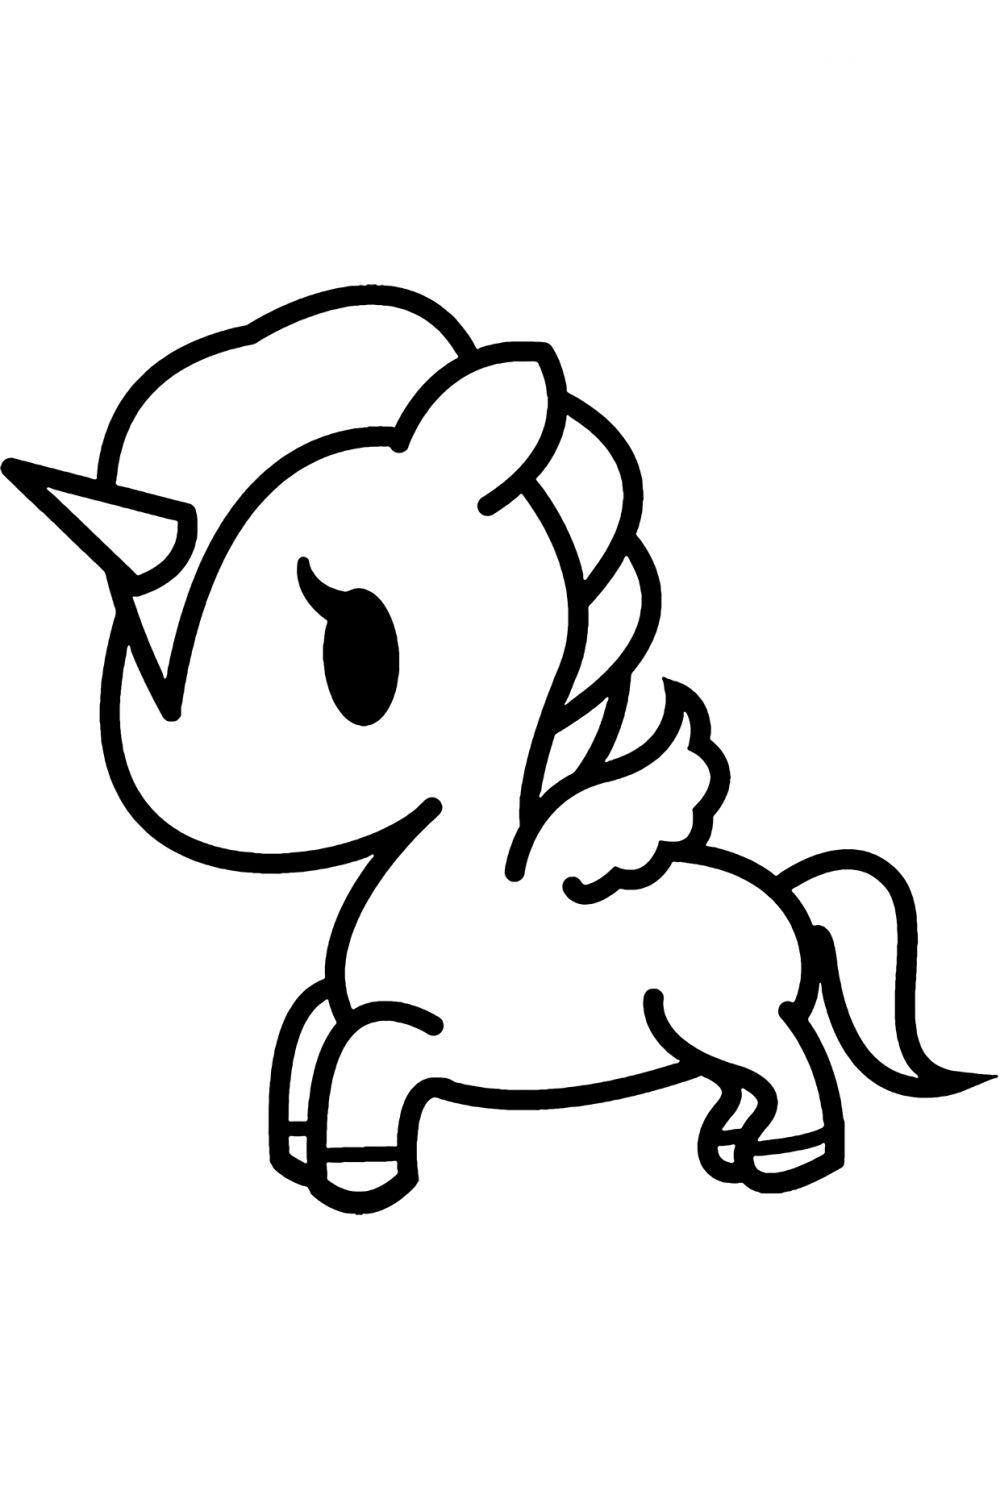 Cute Unicorn Coloring Pages Youloveit Com